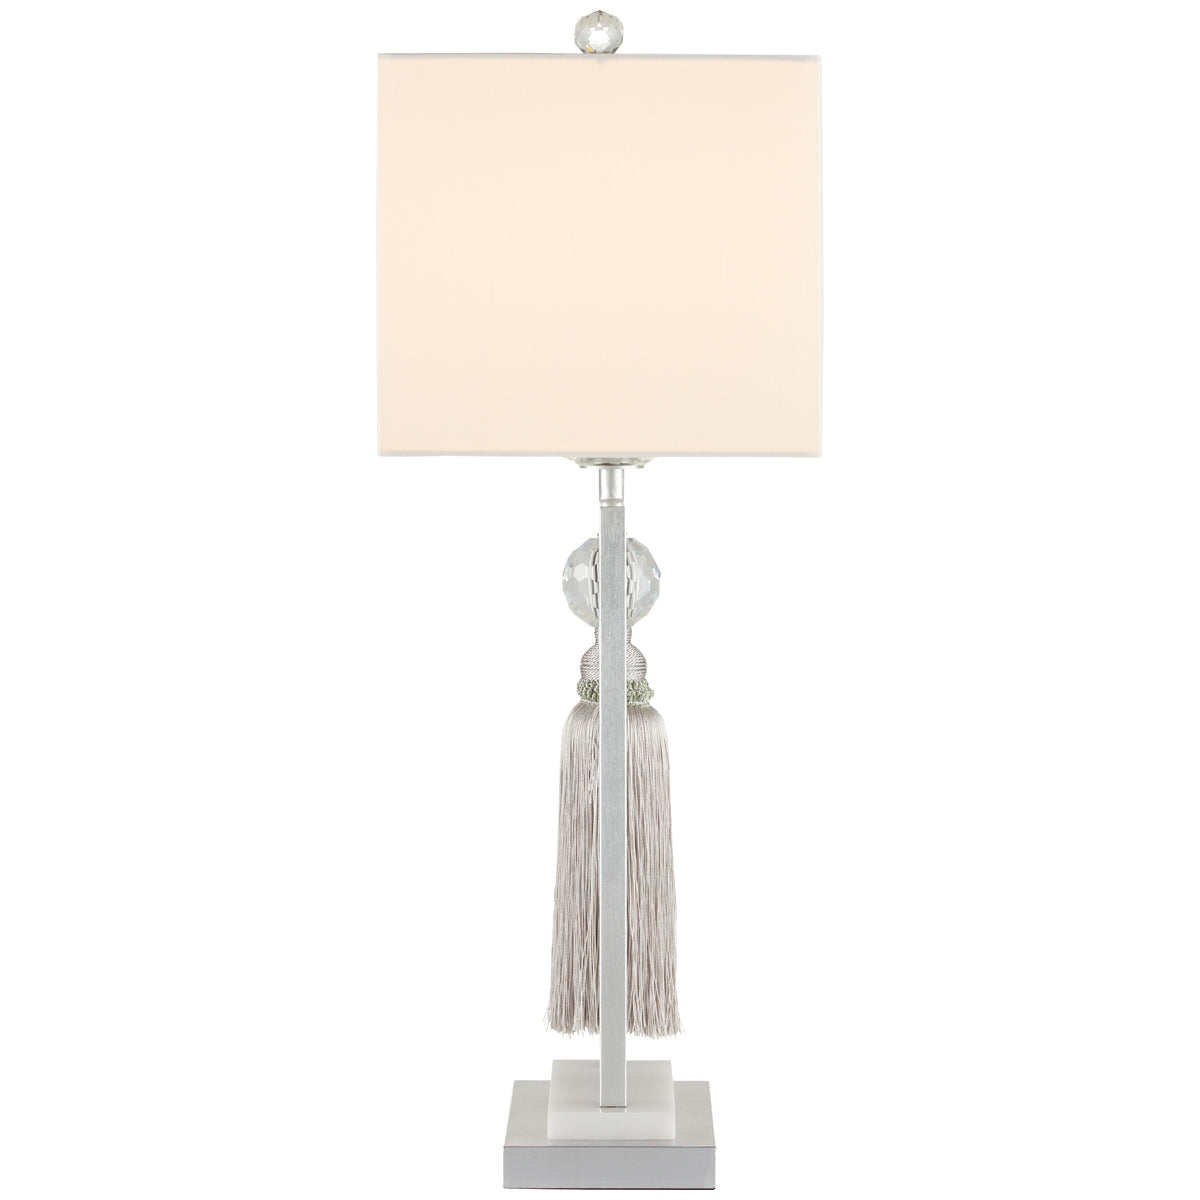 Currey and Company Vitale Table Lamp